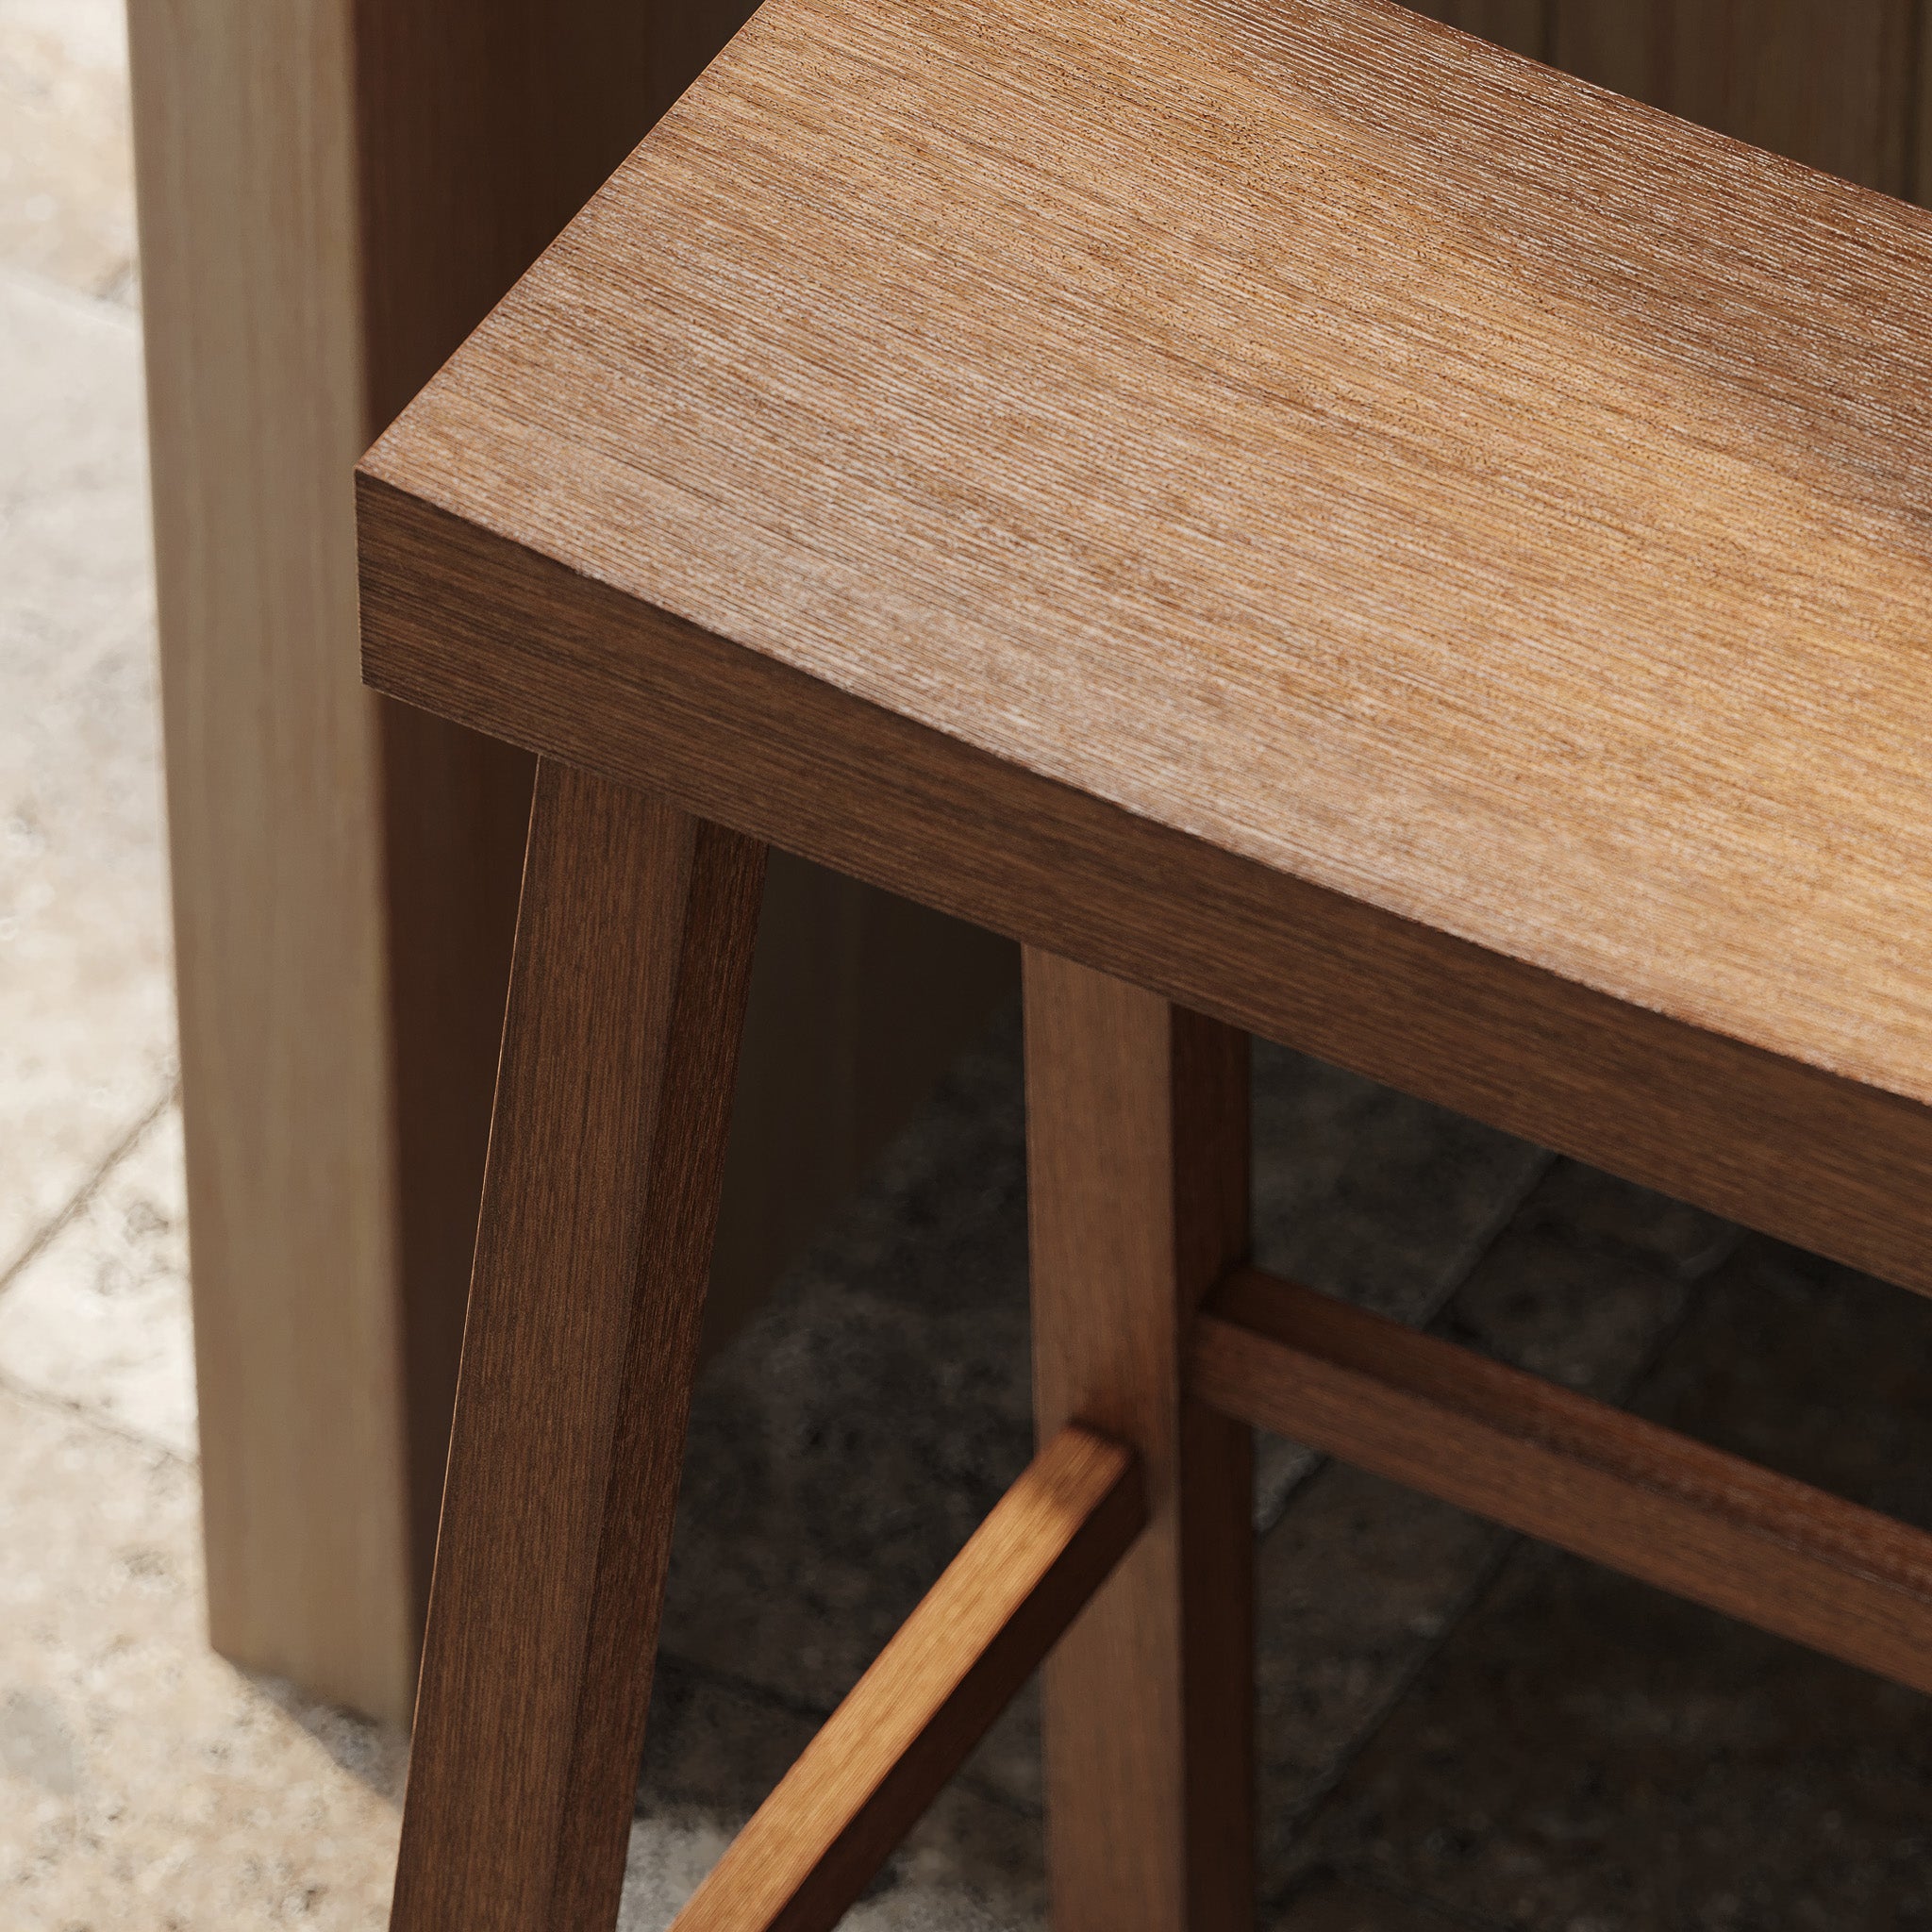 Vincent Bar Stool in Antiqued Natural Finish in Stools by Maven Lane